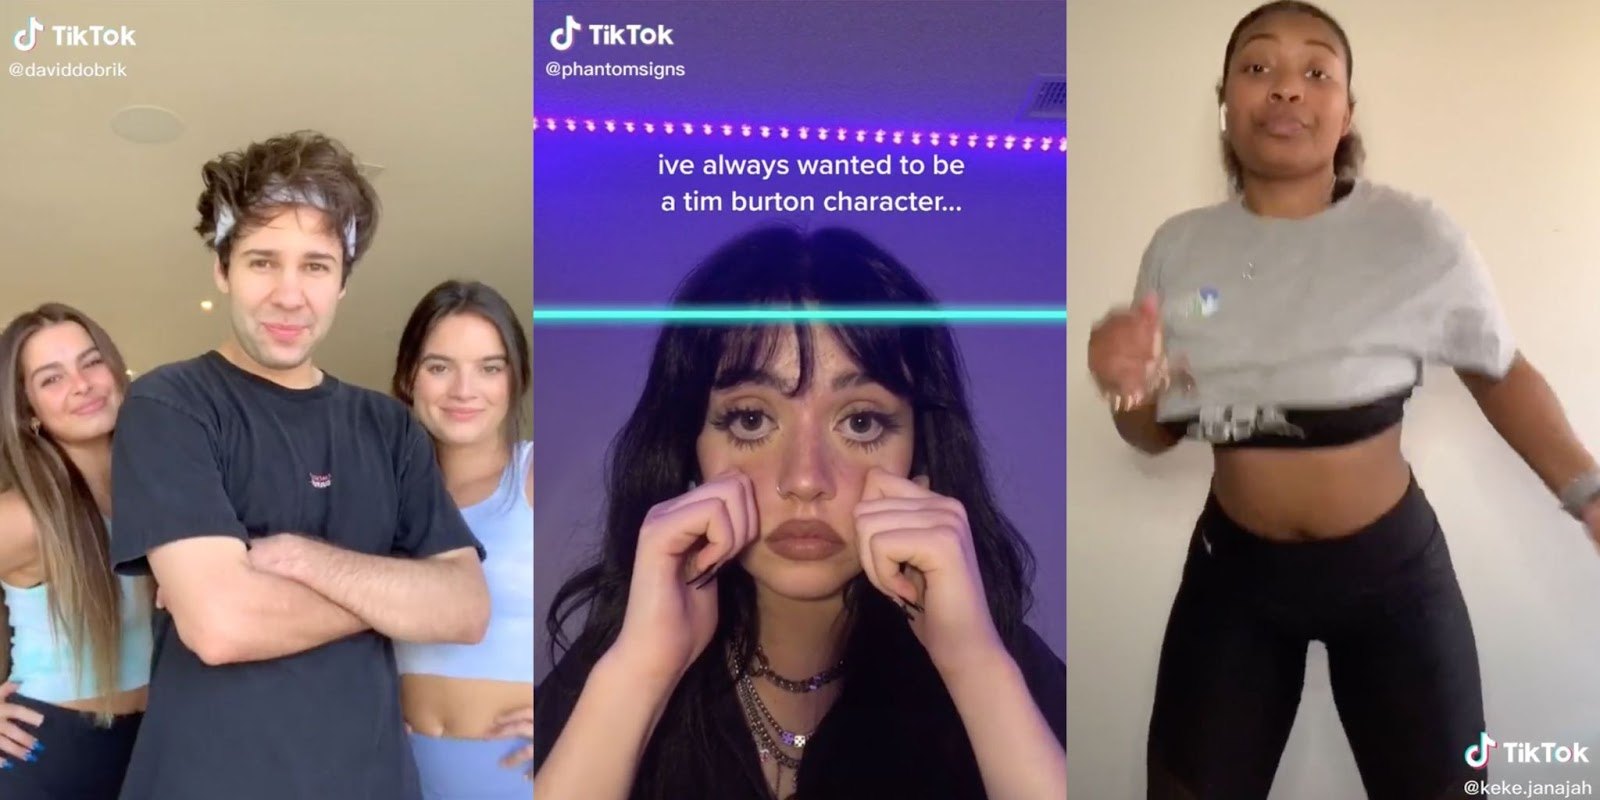 How to Get Followers on TikTok - Step-by-Step Guide